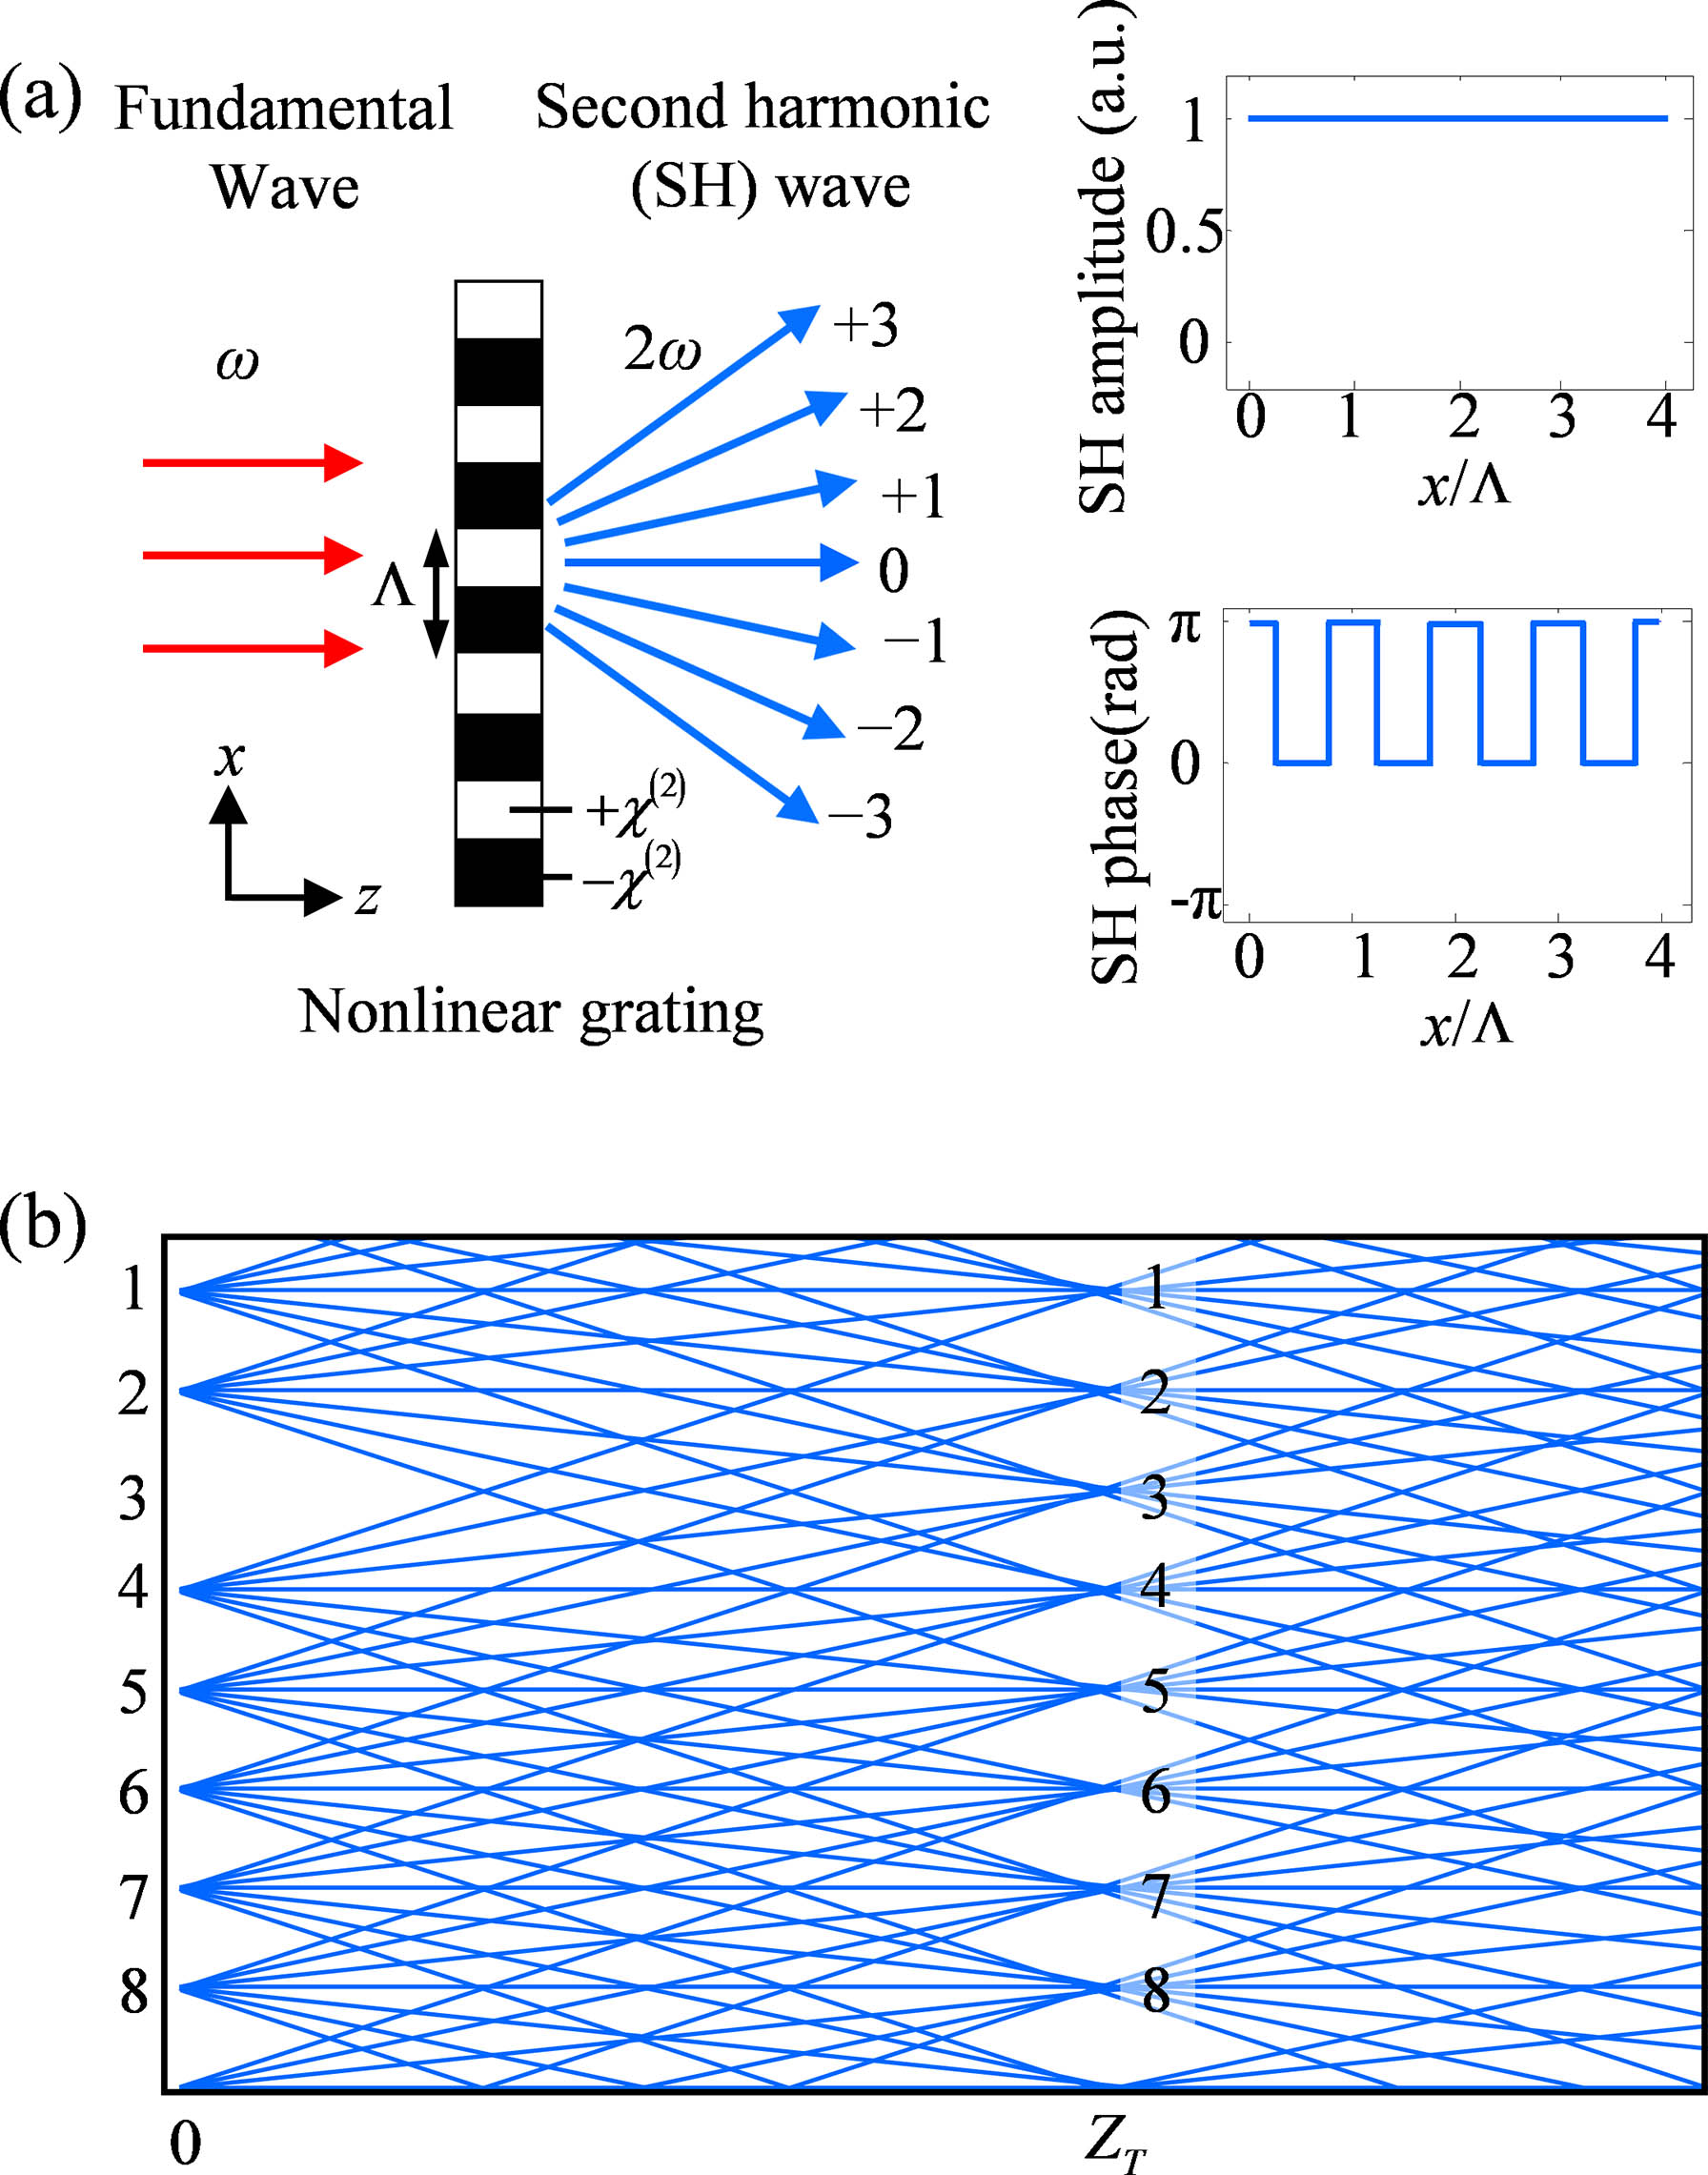 (a) SH diffraction from a nonlinear χ(2) grating. The grating has a periodic variation of the sign of the second-order nonlinear coefficient χ(2), which can generate SH waves with uniform amplitude but periodic phase difference of π. (b) Illustrating Talbot self-healing, where the initially missing point (#3) is restored in the first Talbot image plane.